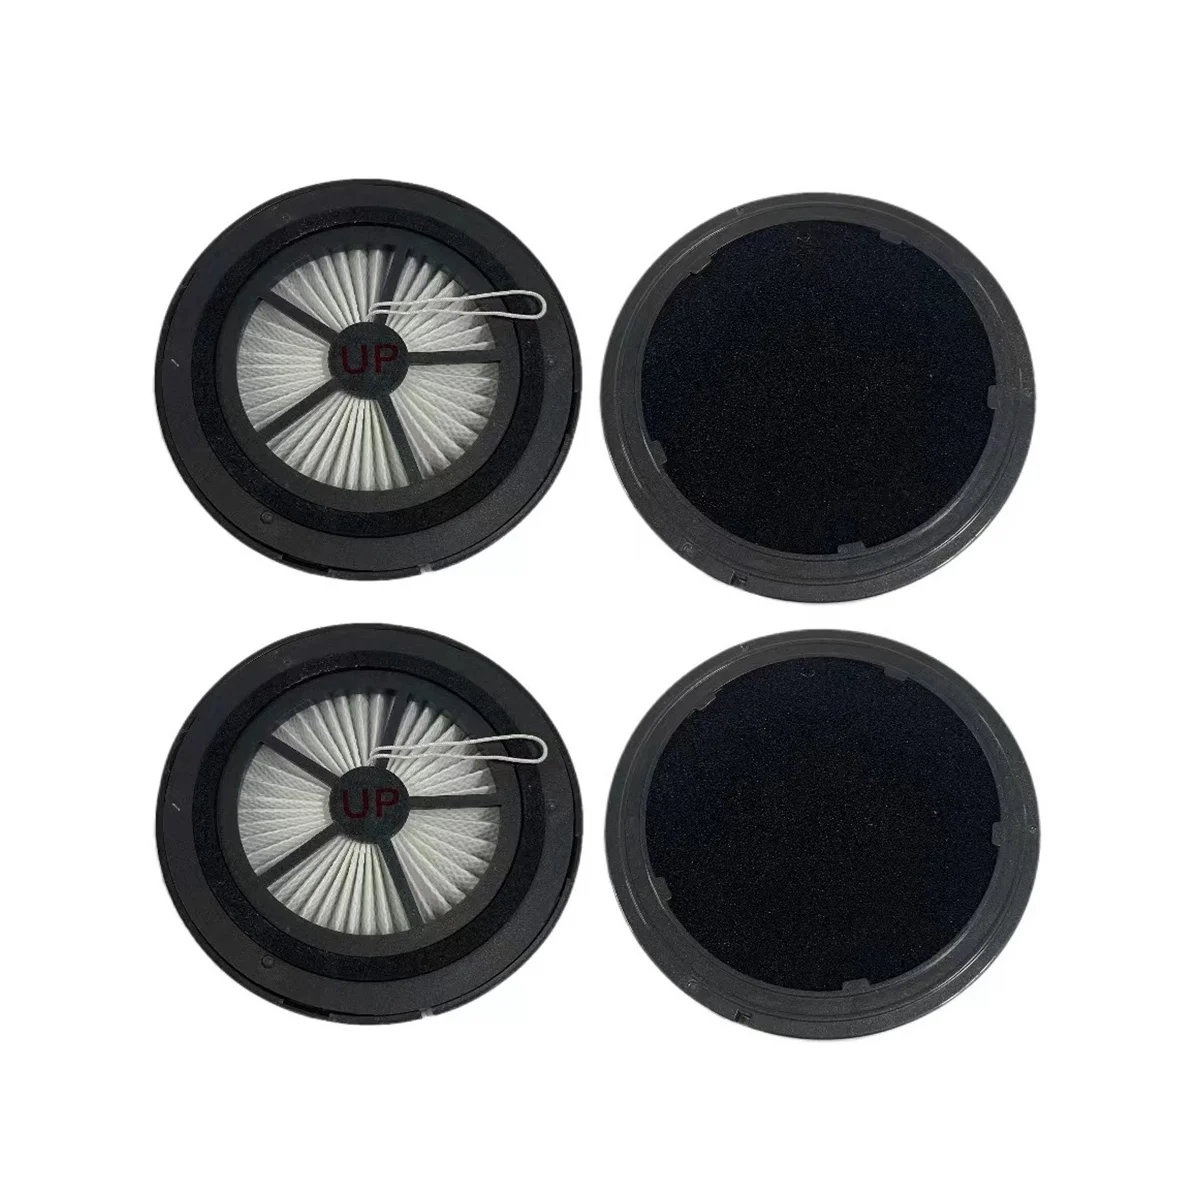 

4PCS Accessories HEPA Filter Elements Filters Spare Parts for Proscenic P11 P10 P10Pro Vacuum Cleaner